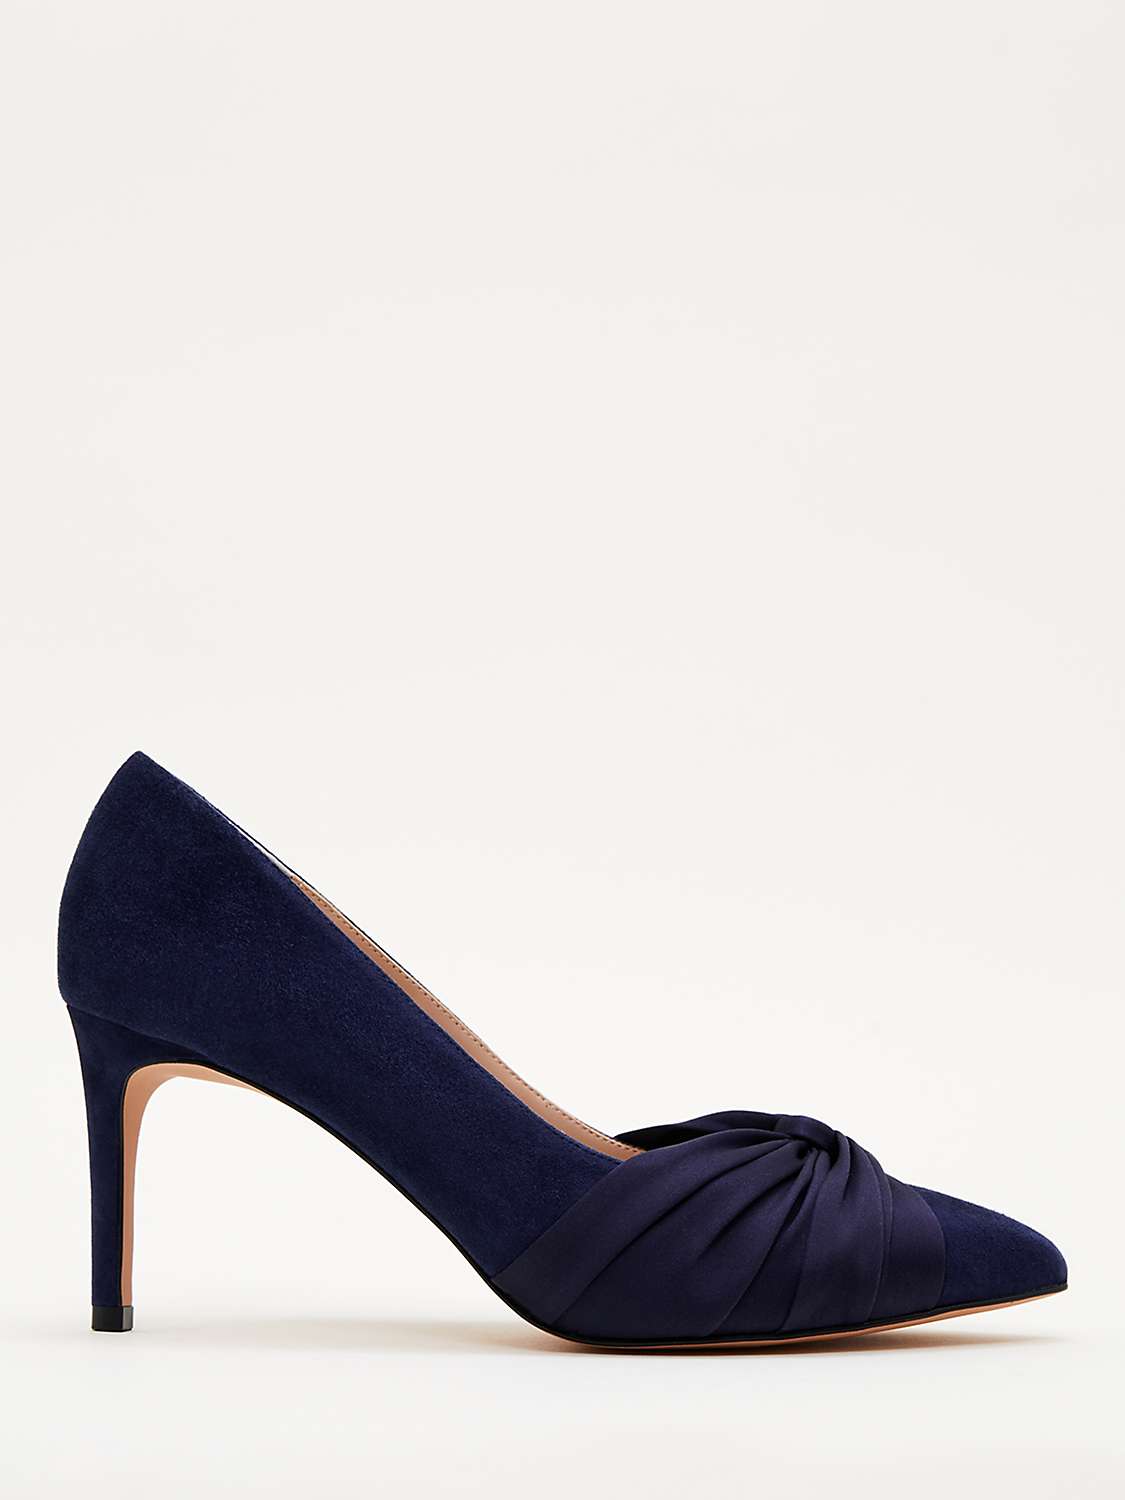 Phase Eight Kendal Court Shoes, Navy at John Lewis & Partners